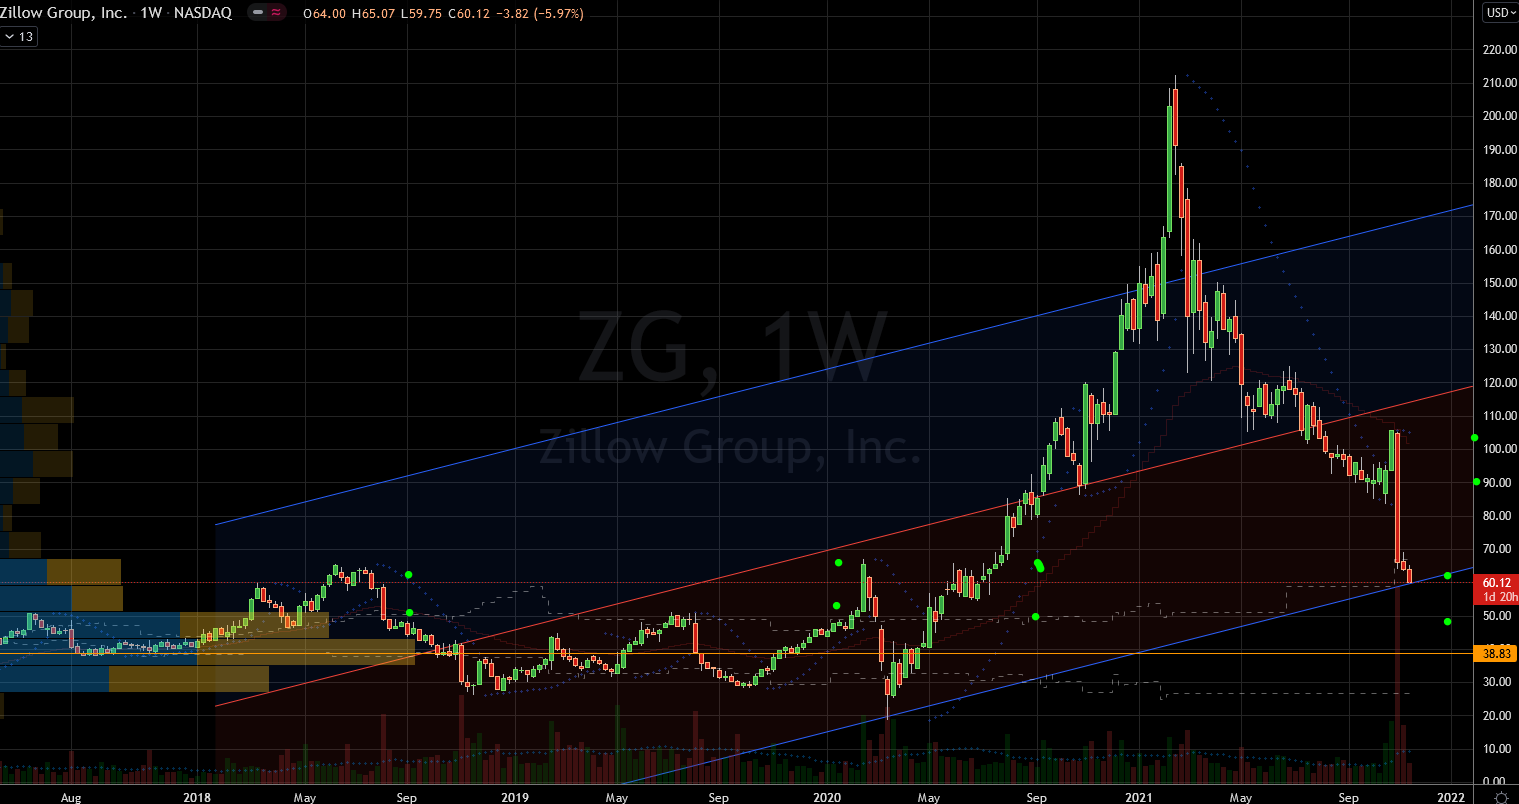 Stocks to Buy: Zillow (ZG) Stock Chart Showing Potential Support